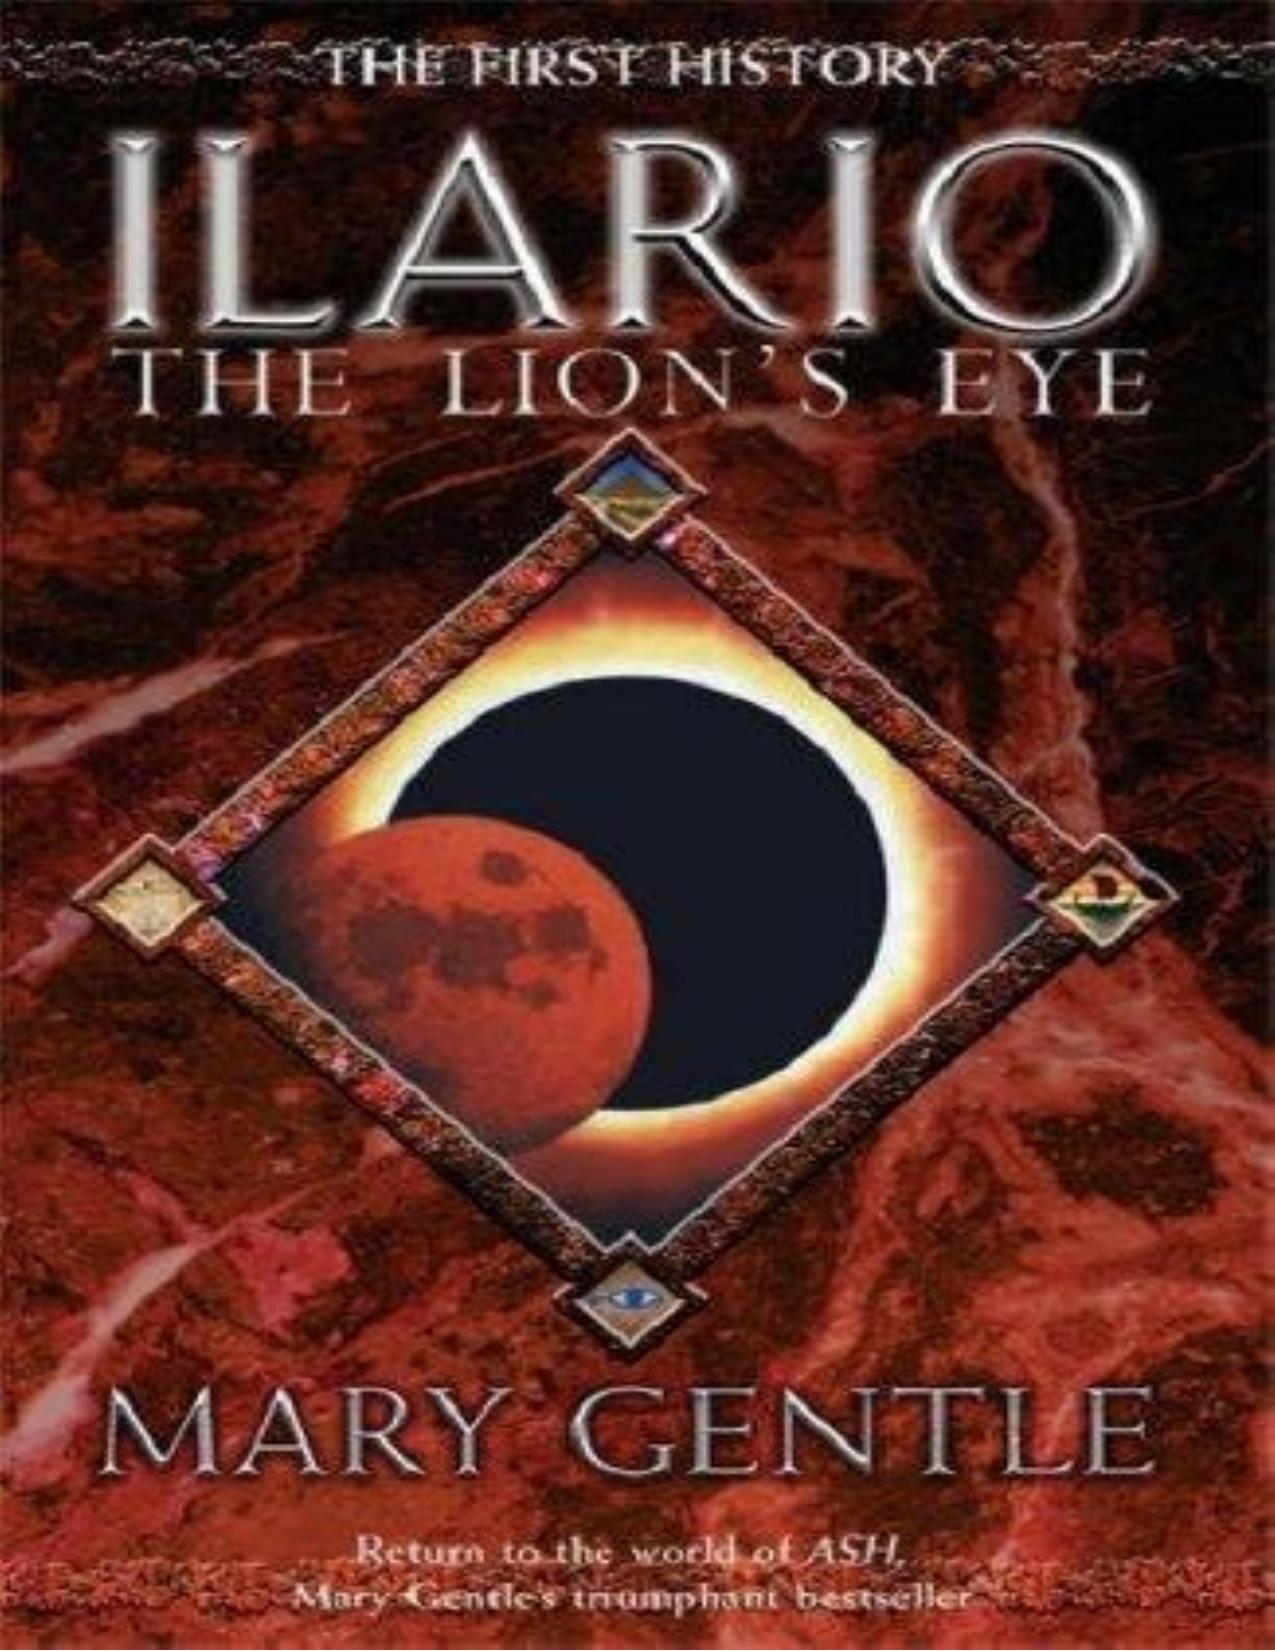 Ilario: The Lion's Eye by Mary Gentle